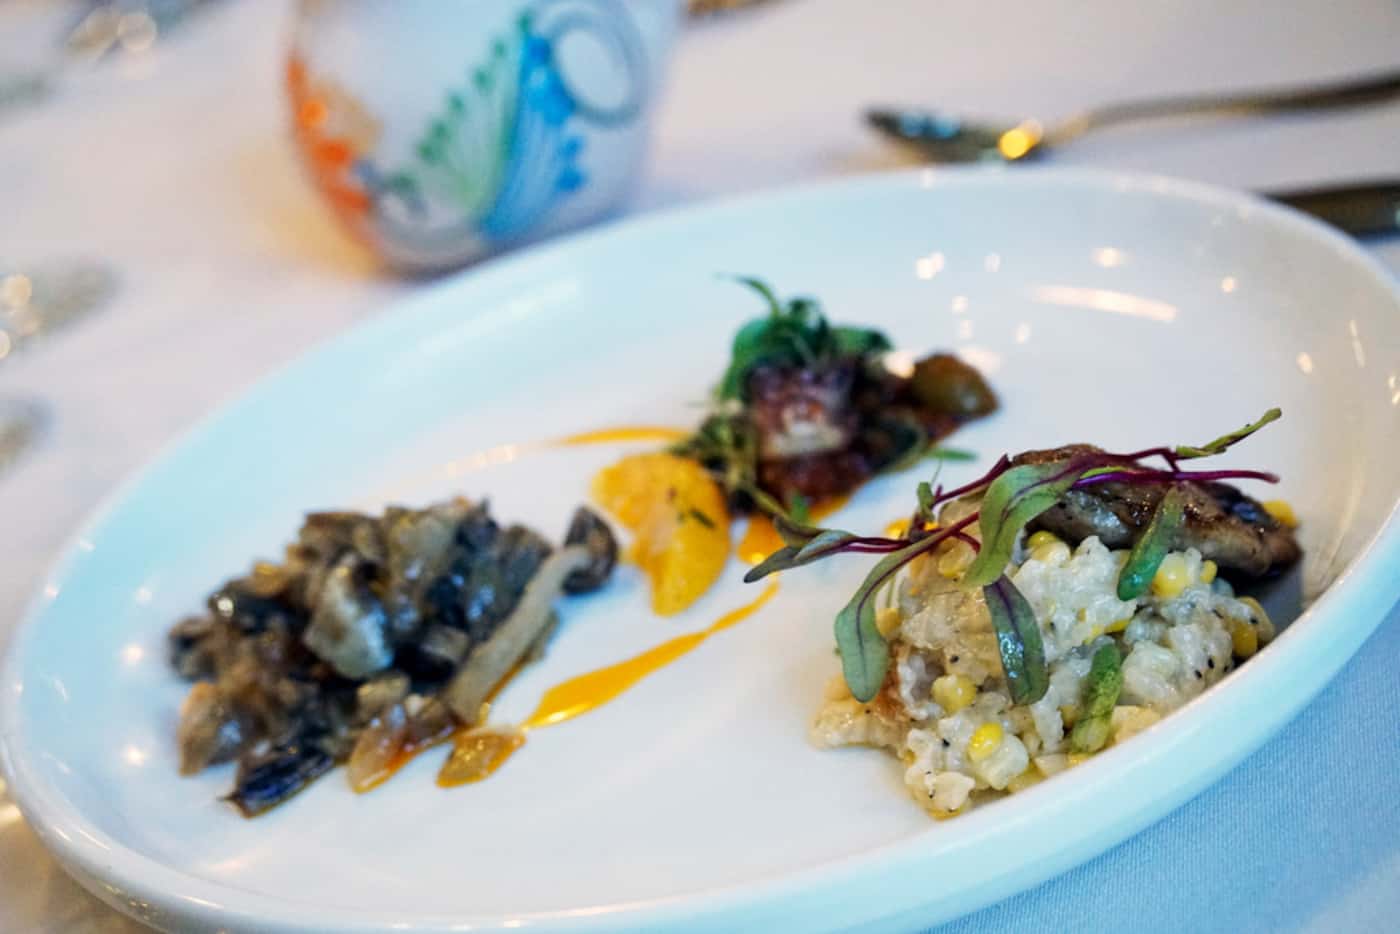 Appetizers include shiitake and chantrelle mushroom, Mediterranean pulpo, and spiced maple...